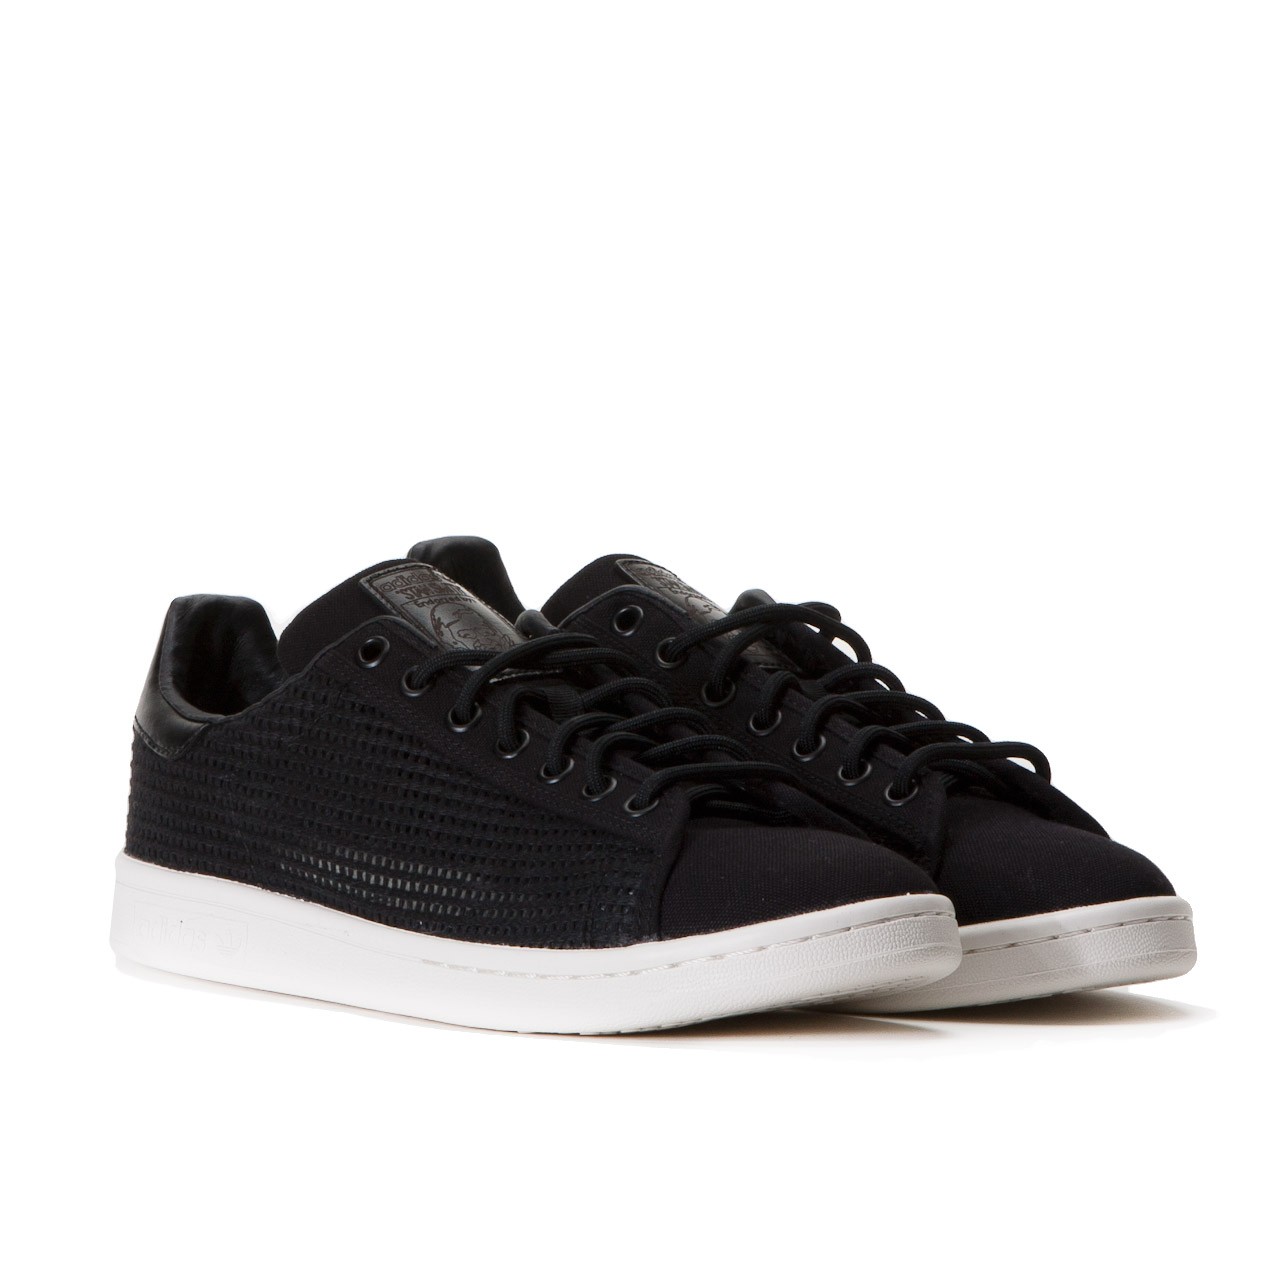 adidas Stan Smith Woven Core Black - Where To Buy - B24362 | The 